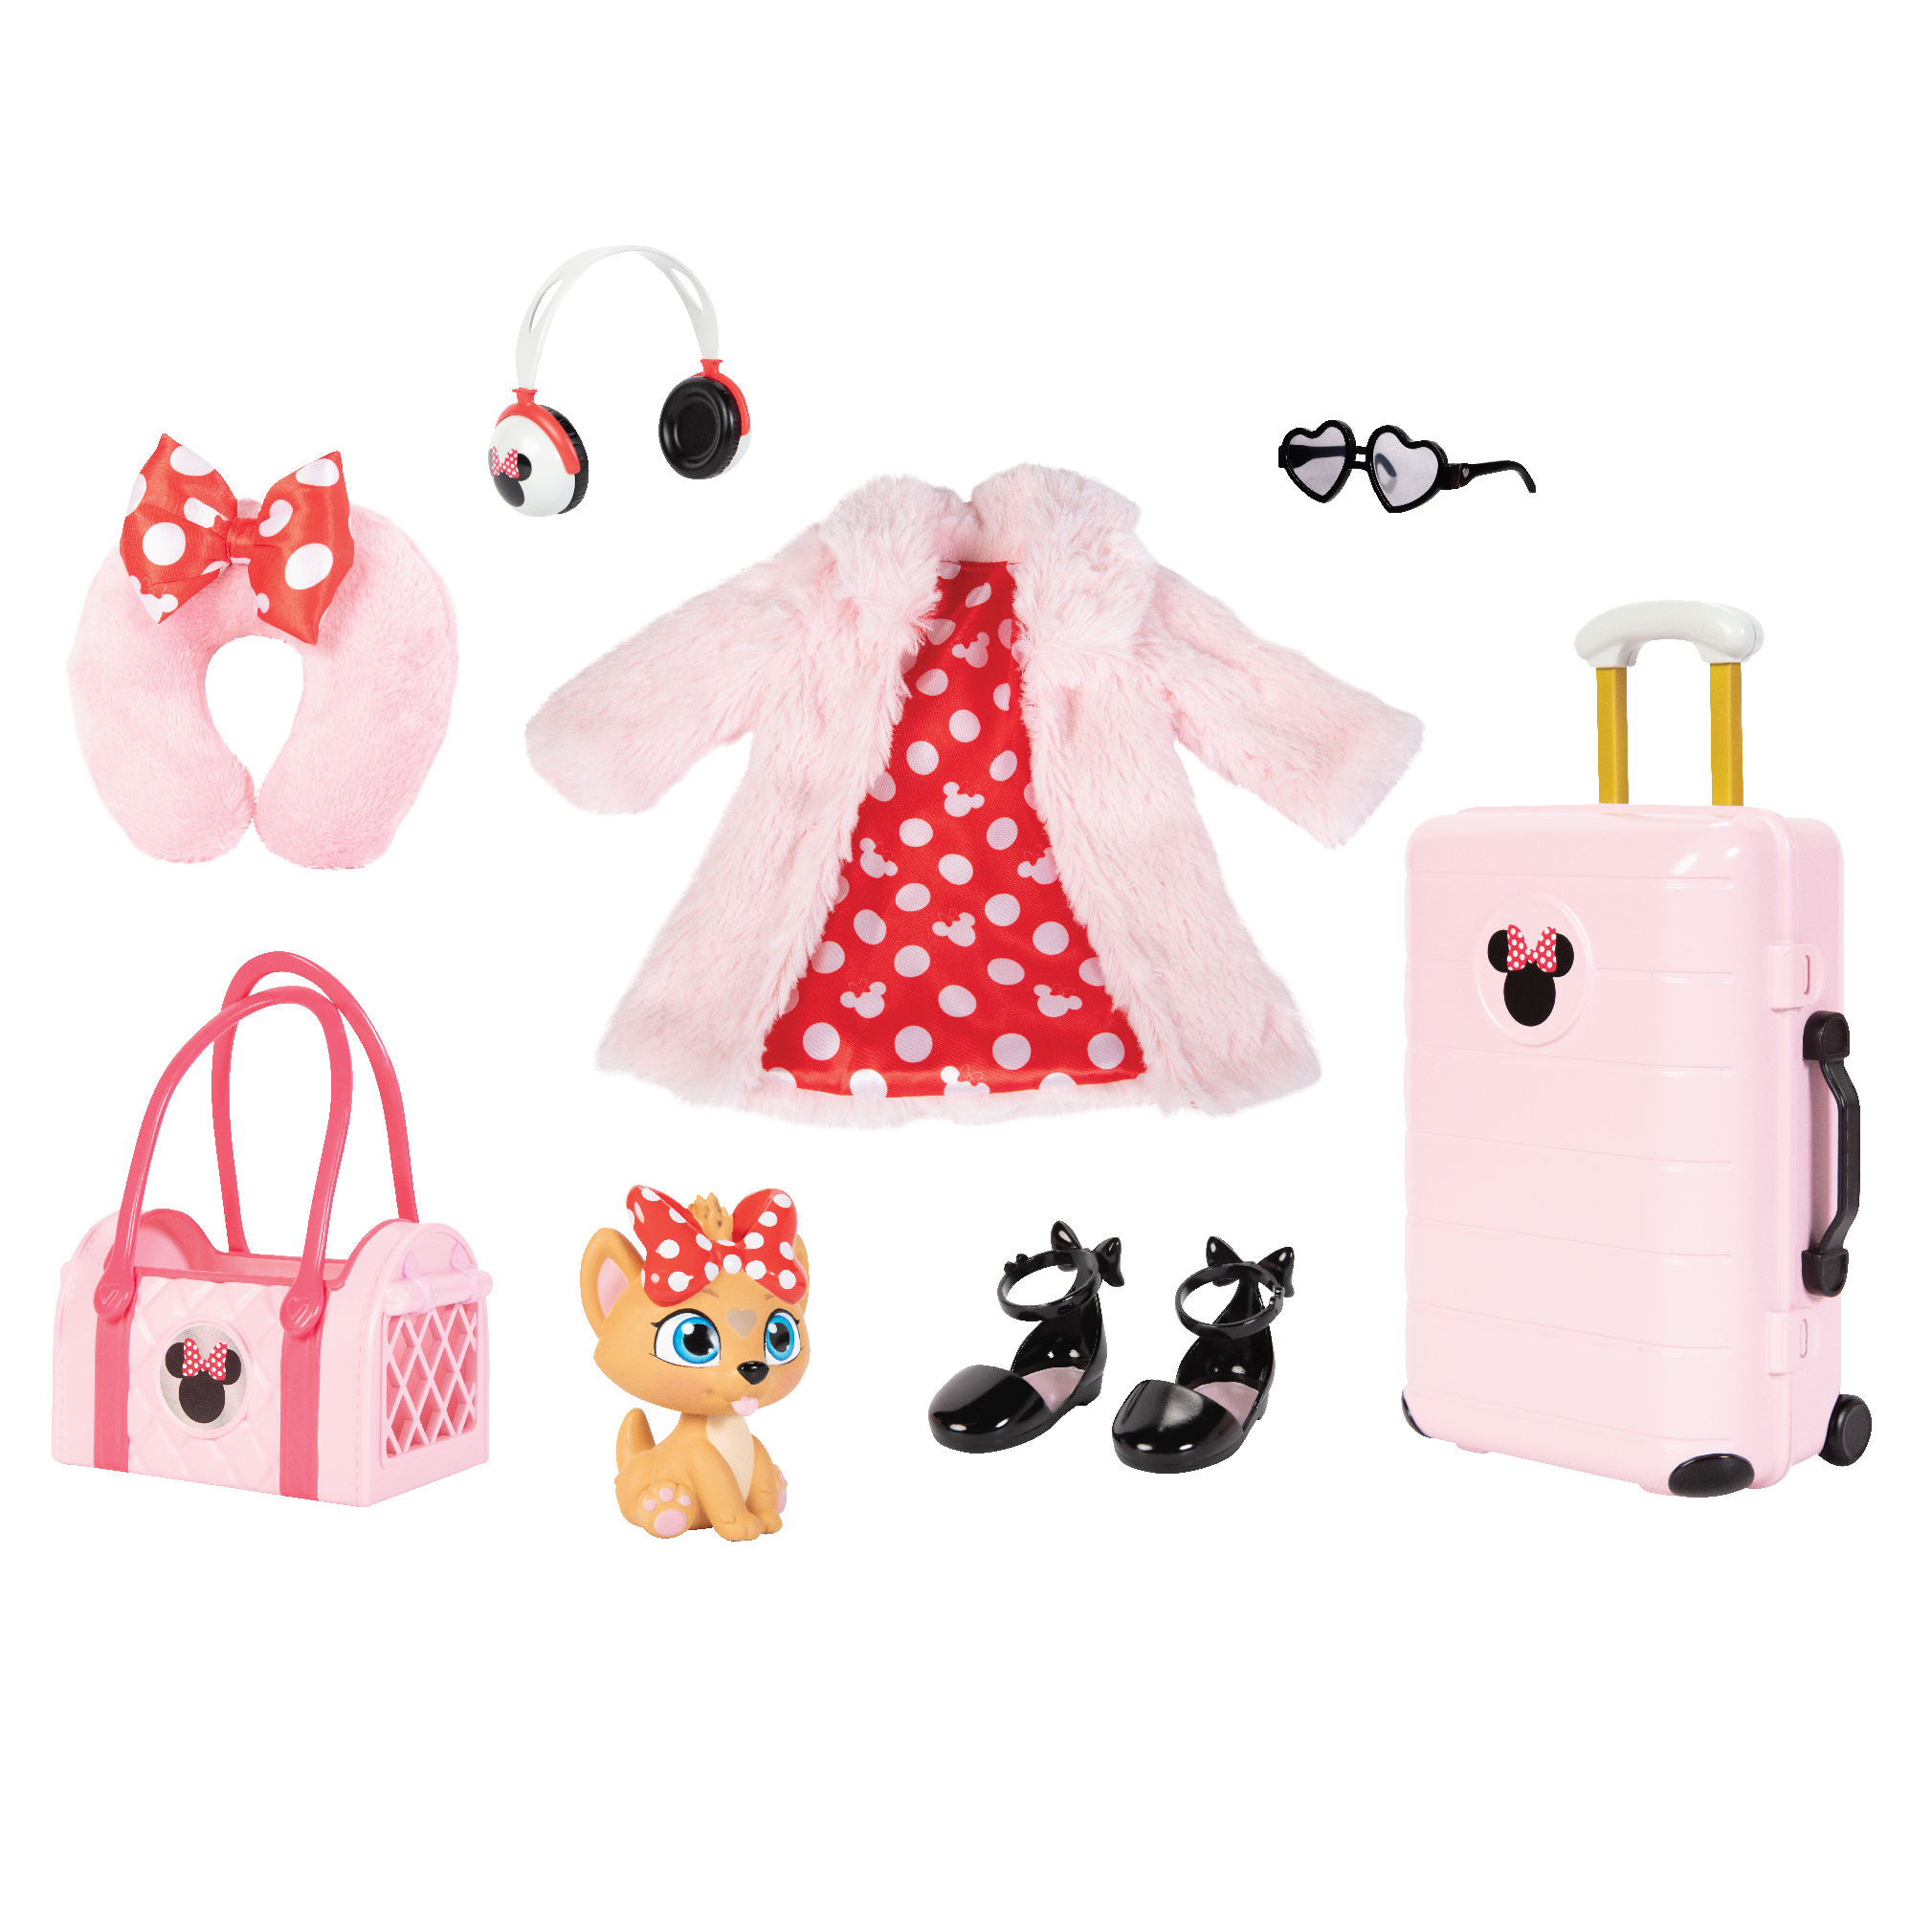 Disney ILY 4EVER Inspired by Minnie Mouse Deluxe Fashion & Accessory Pack